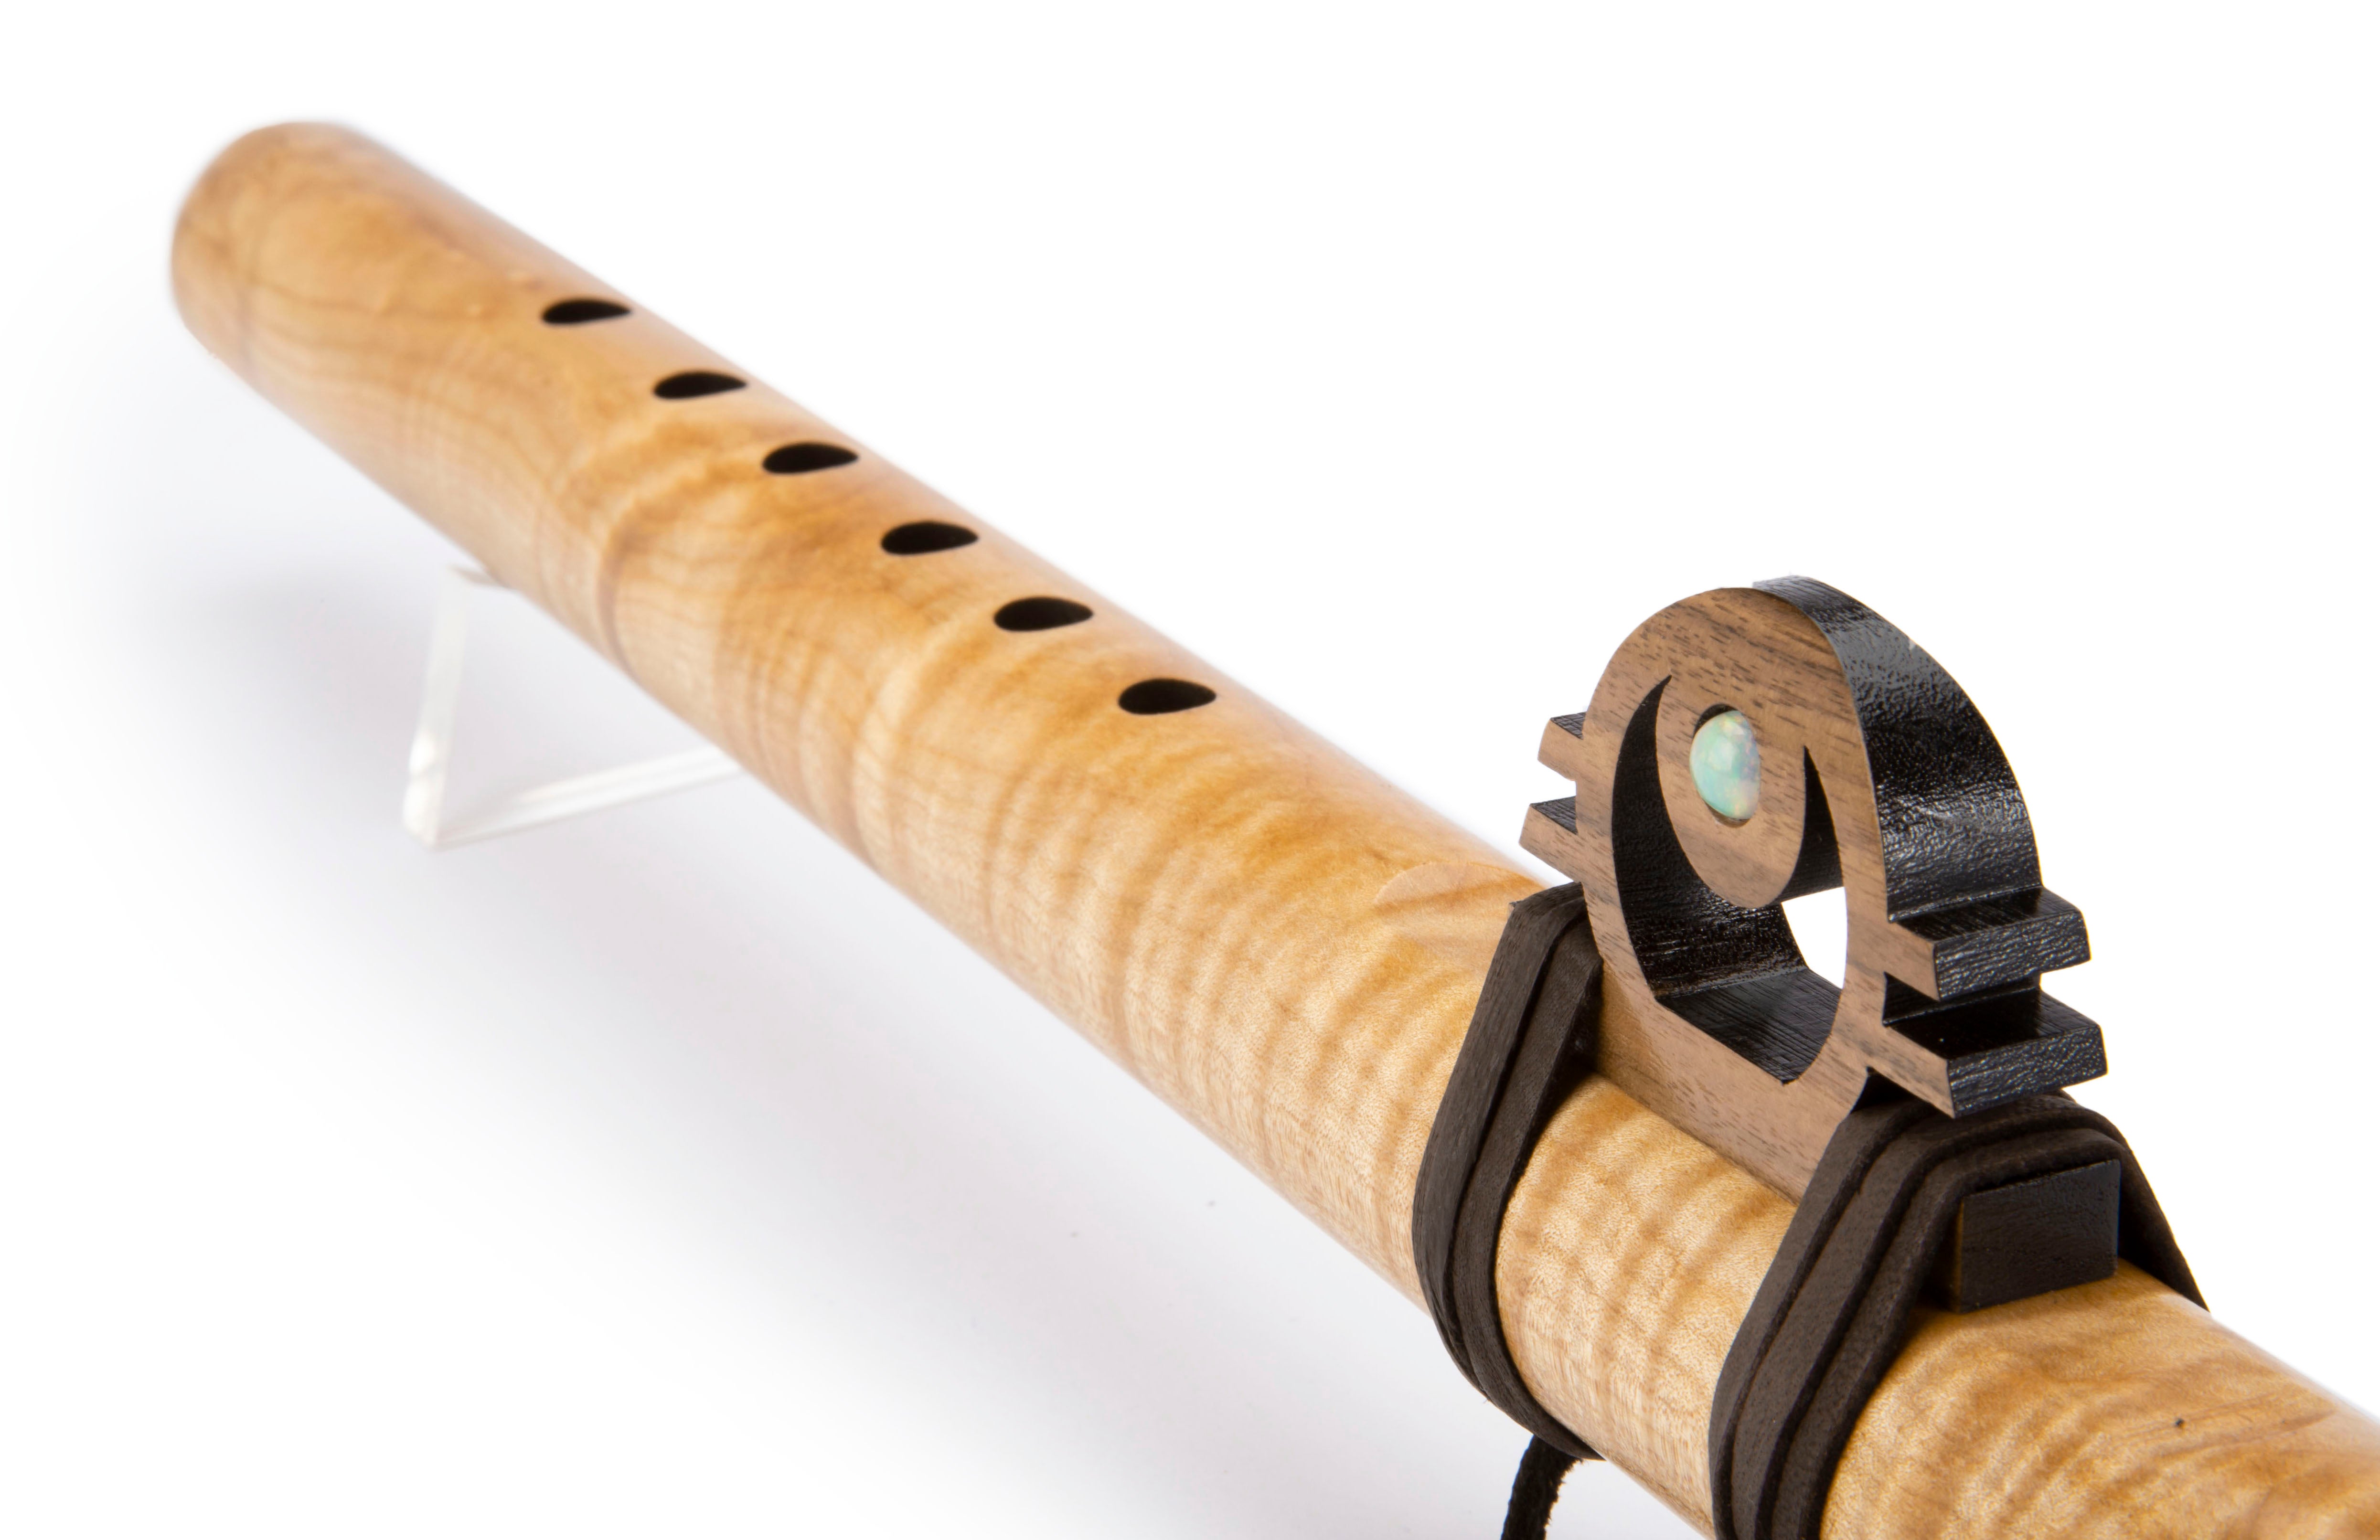 Signature Lunar Flute - A - Quilted Maple (all sales final)